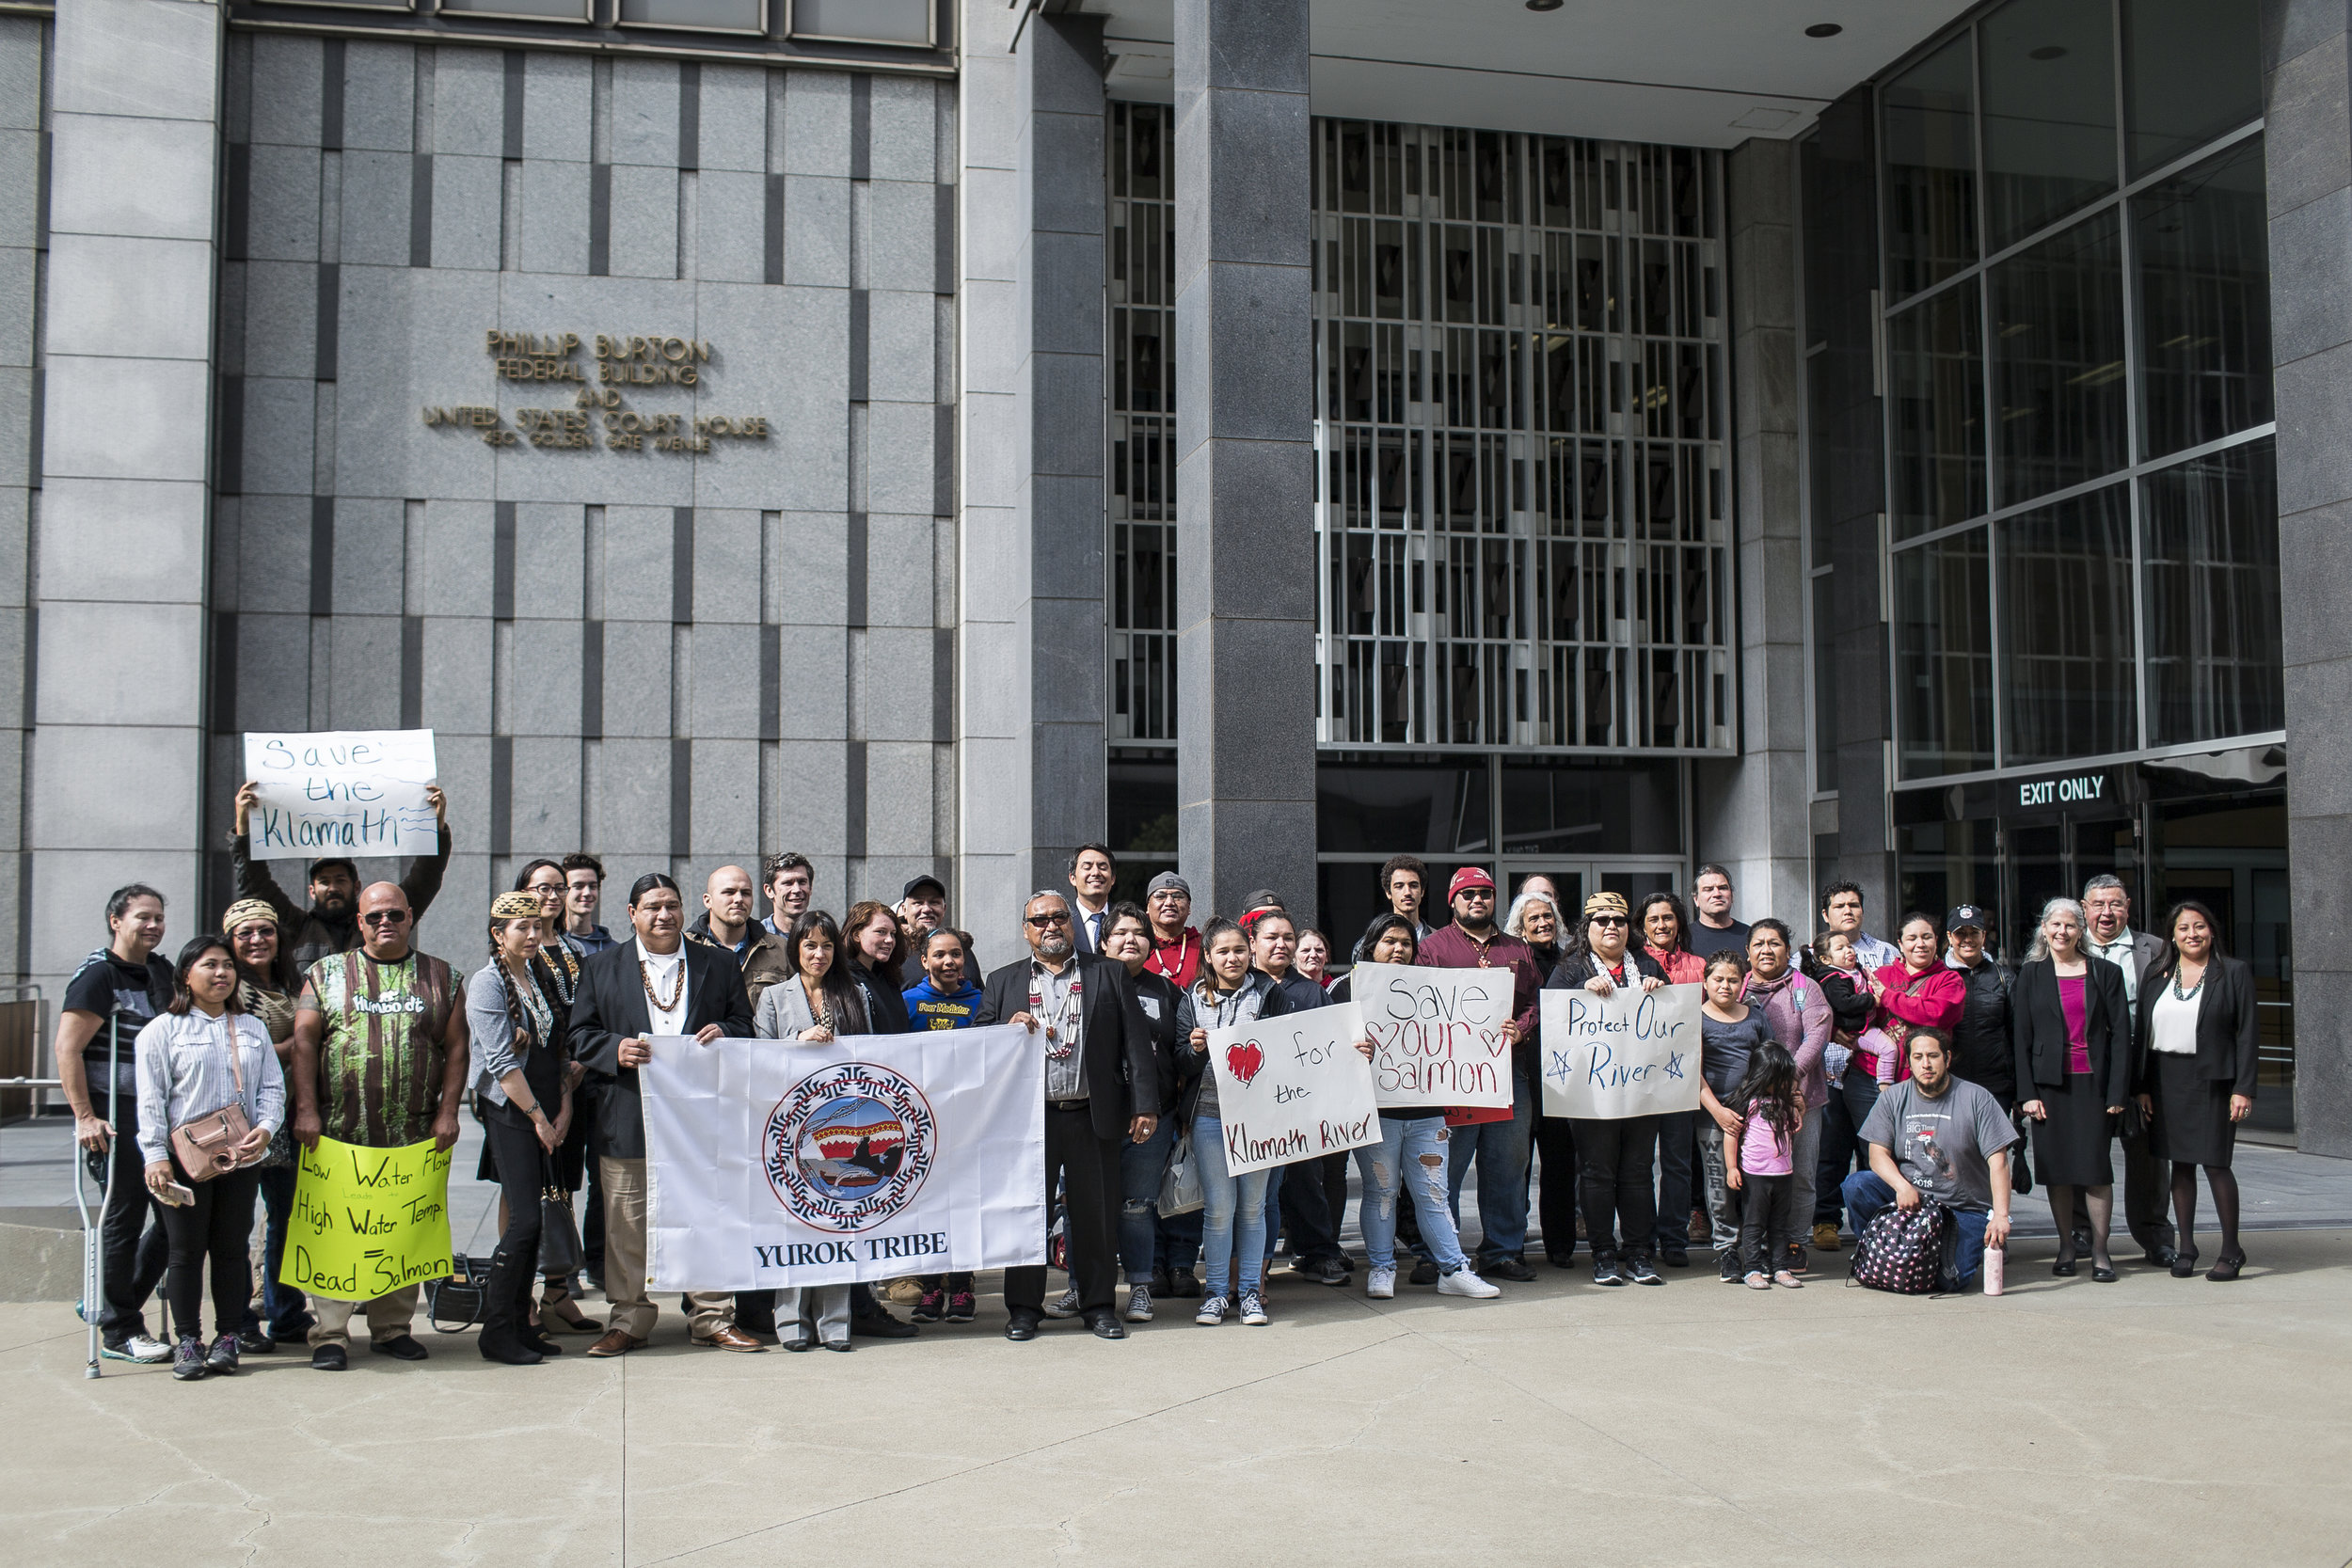  Yurok Tribe members and allies outside Burton Federal Building in San Francisco on Apr. 10, 2018. Martin do Nascimento / Earthjustice 